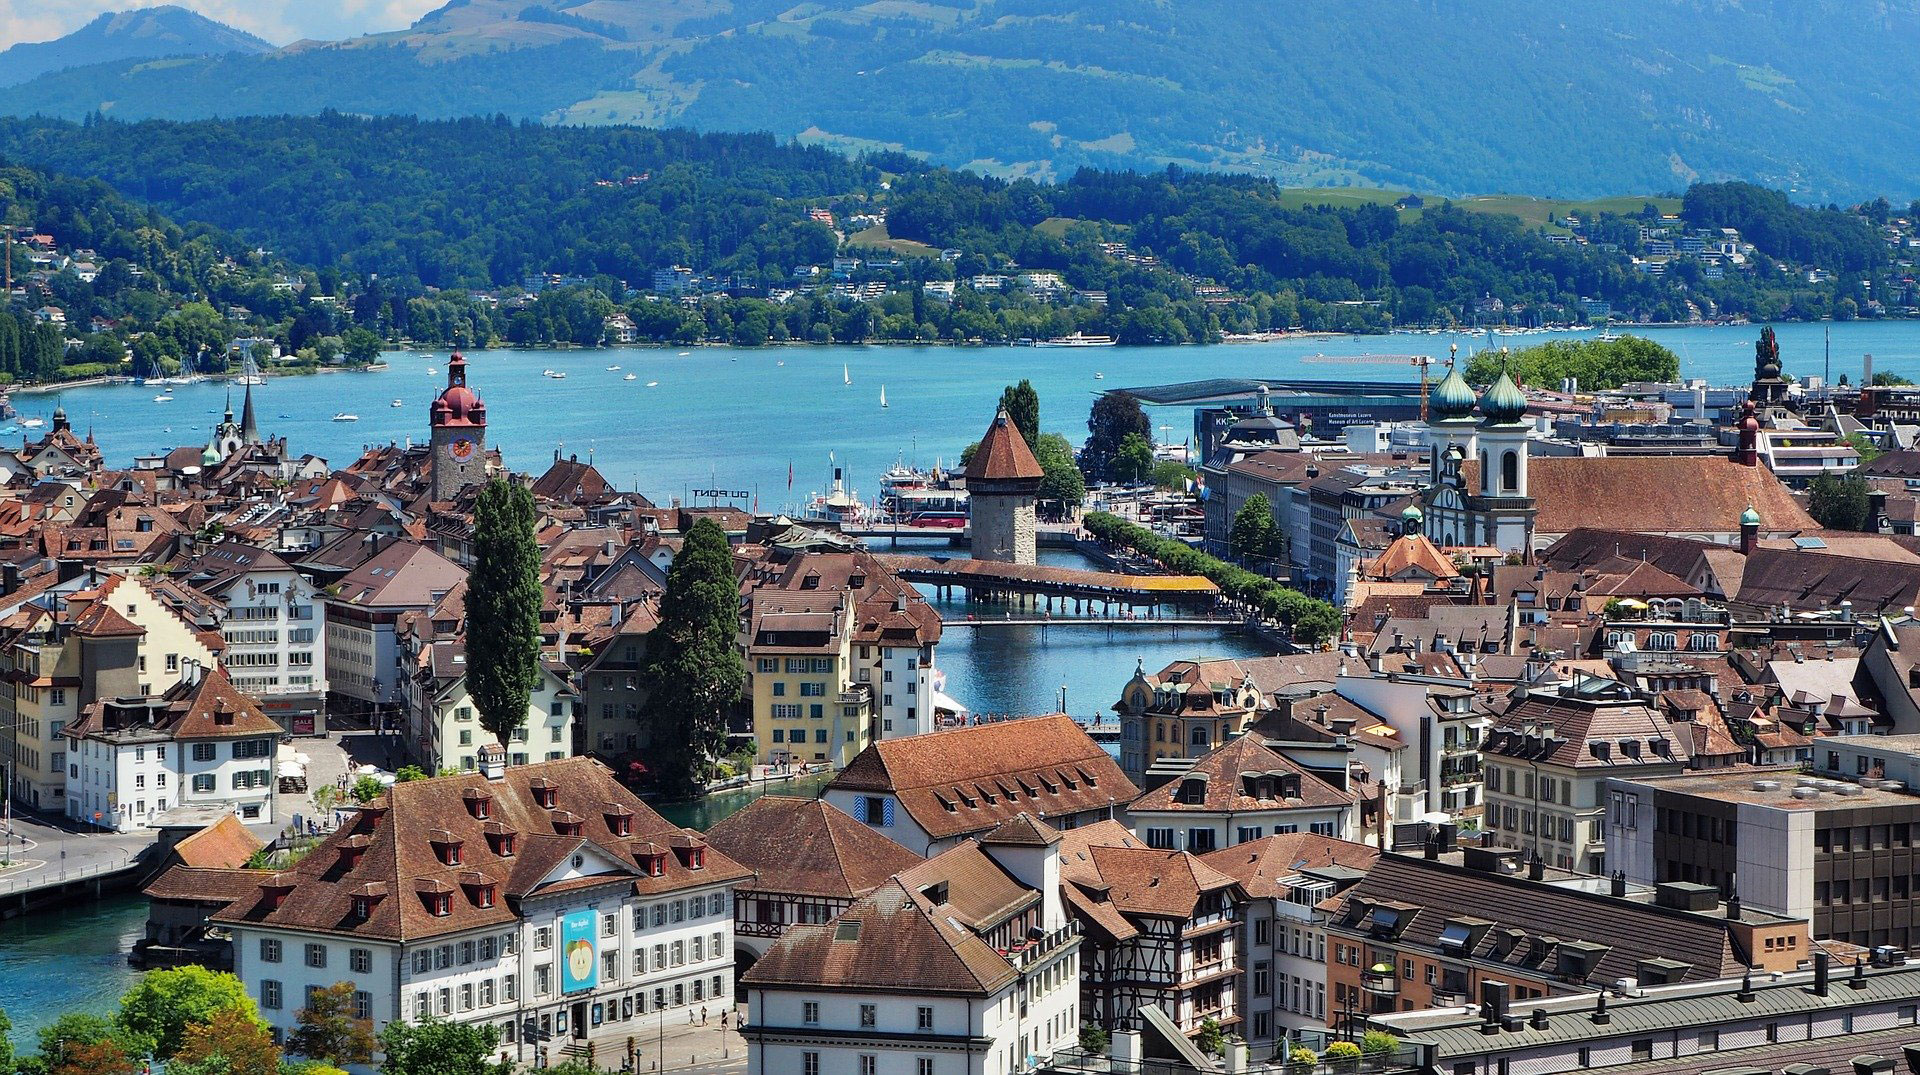 Seminar hotels and meeting rooms in and around Lucerne